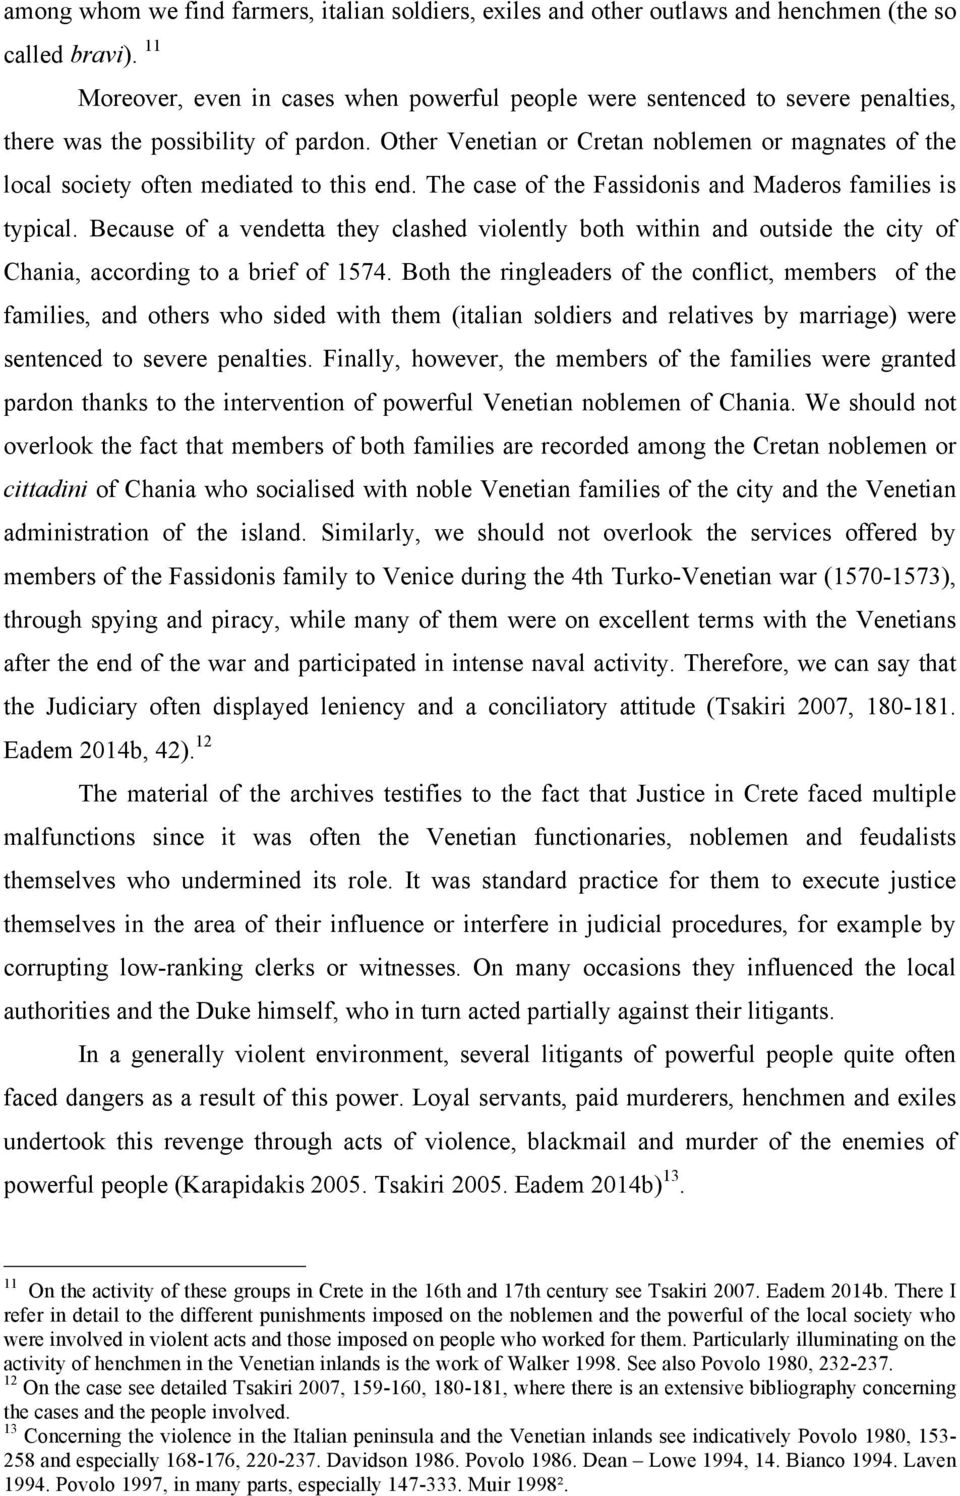 Other Venetian or Cretan noblemen or magnates of the local society often mediated to this end. The case of the Fassidonis and Maderos families is typical.